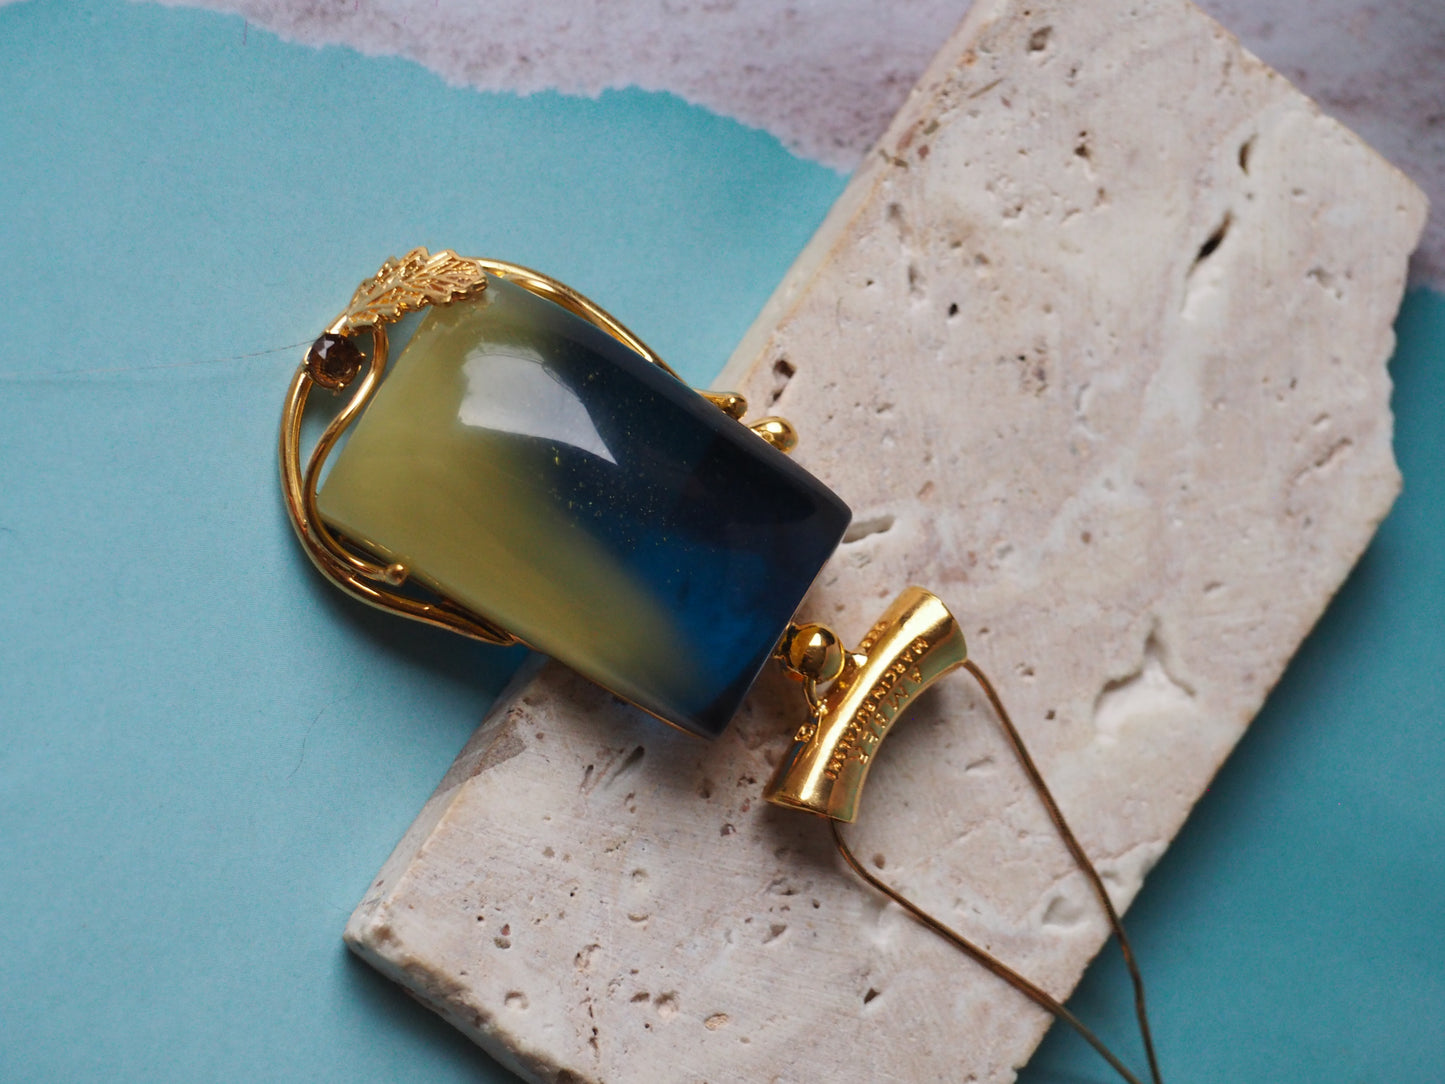 Big Unique Blue Amber Rectangle Pendant with Milk Inclusion in Gold Plated Silver